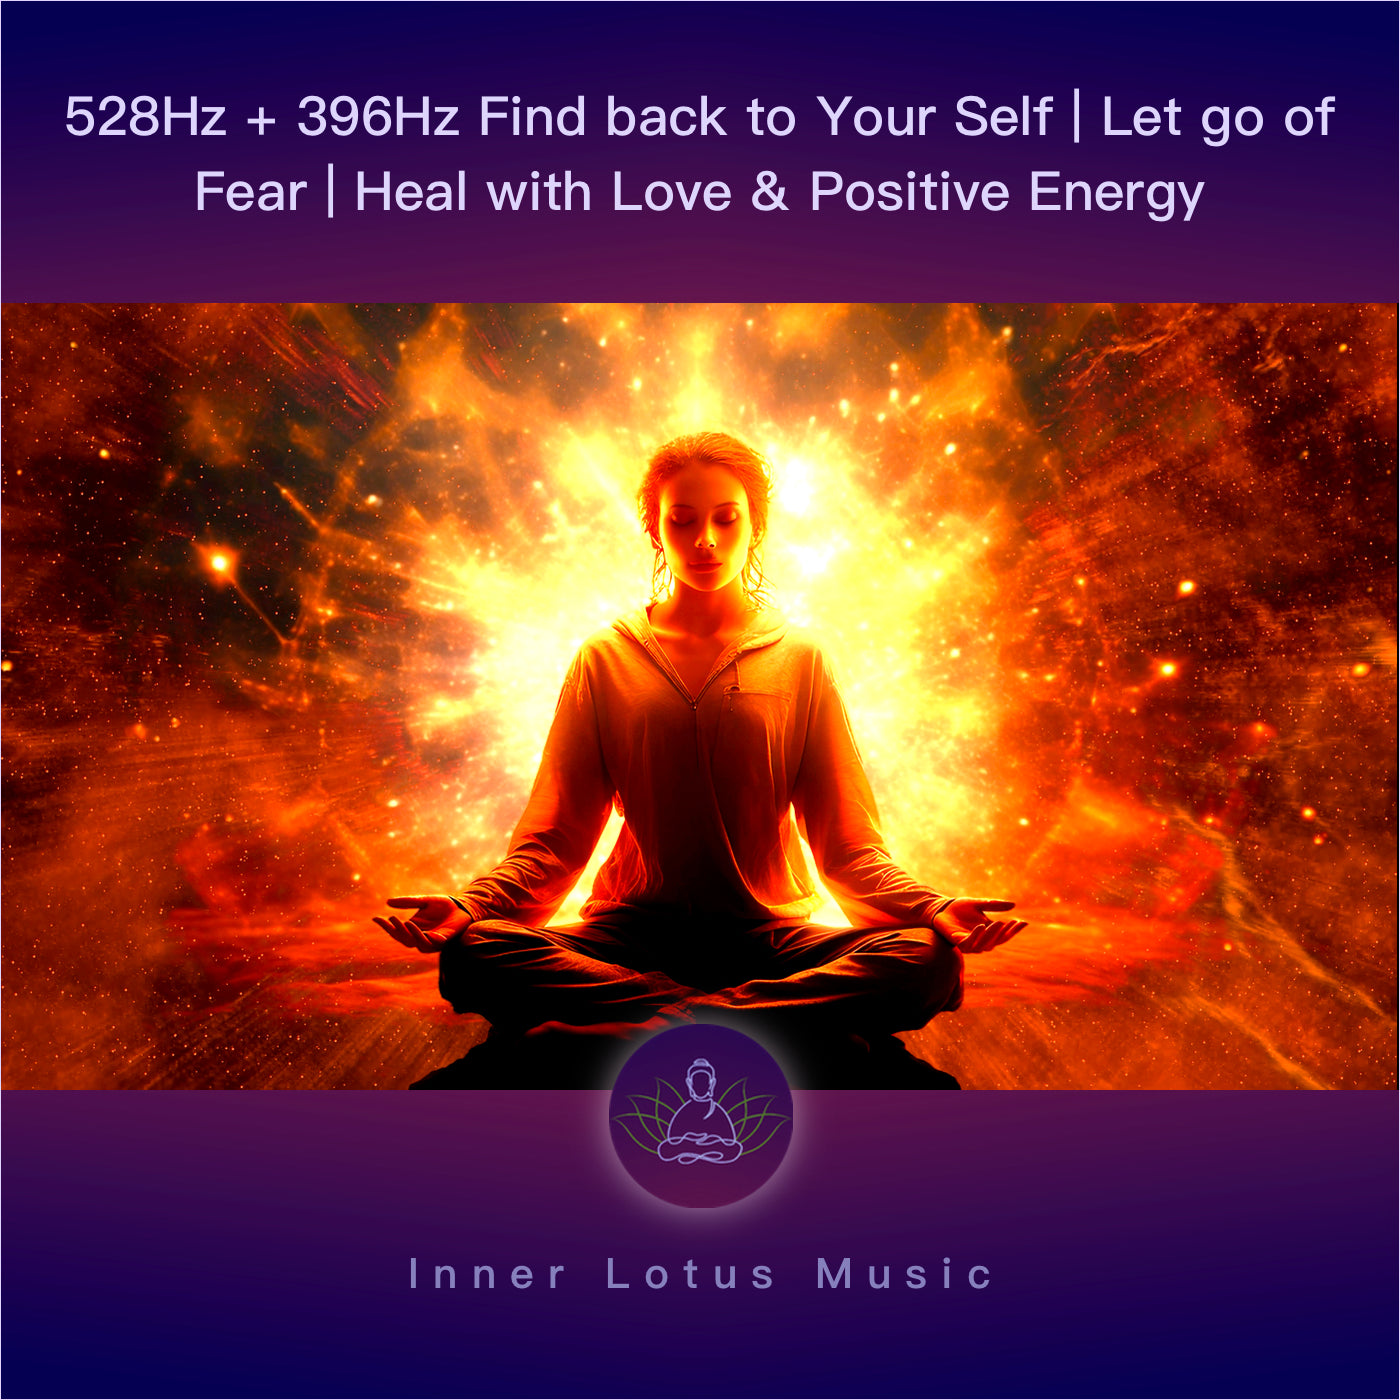 528Hz + 396Hz Find back to Your Self | Let go of Fear | Heal with Love & Positive Energy